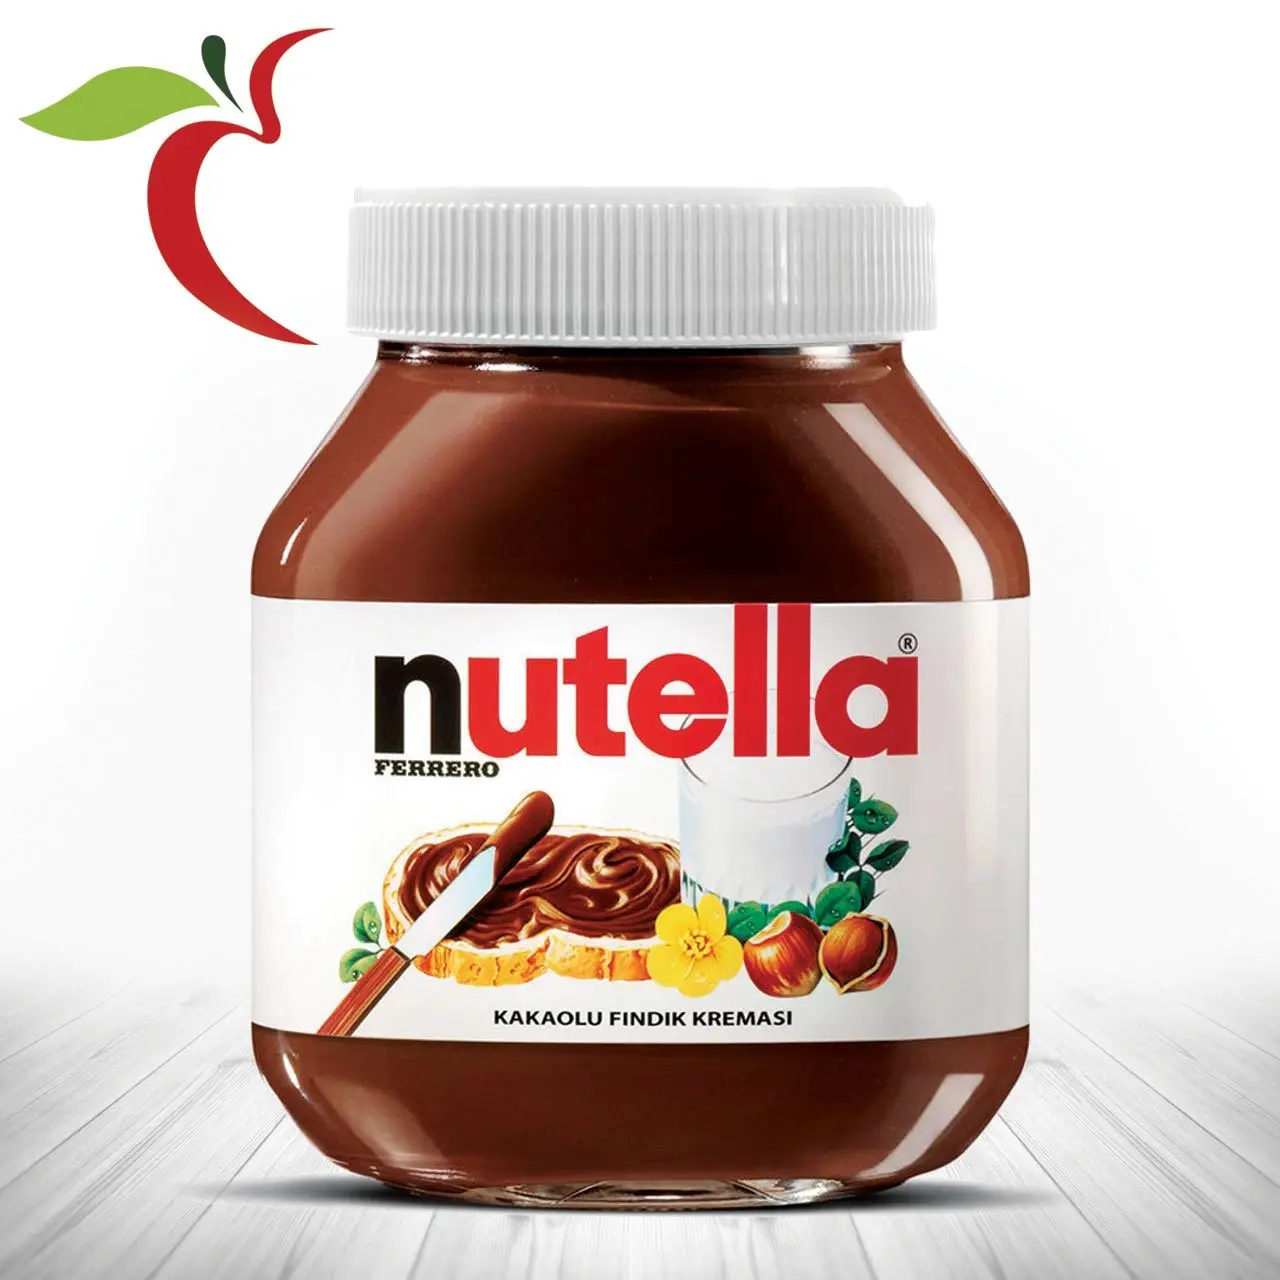 
FOR NUTELLA CHOCOLATE 750gr 